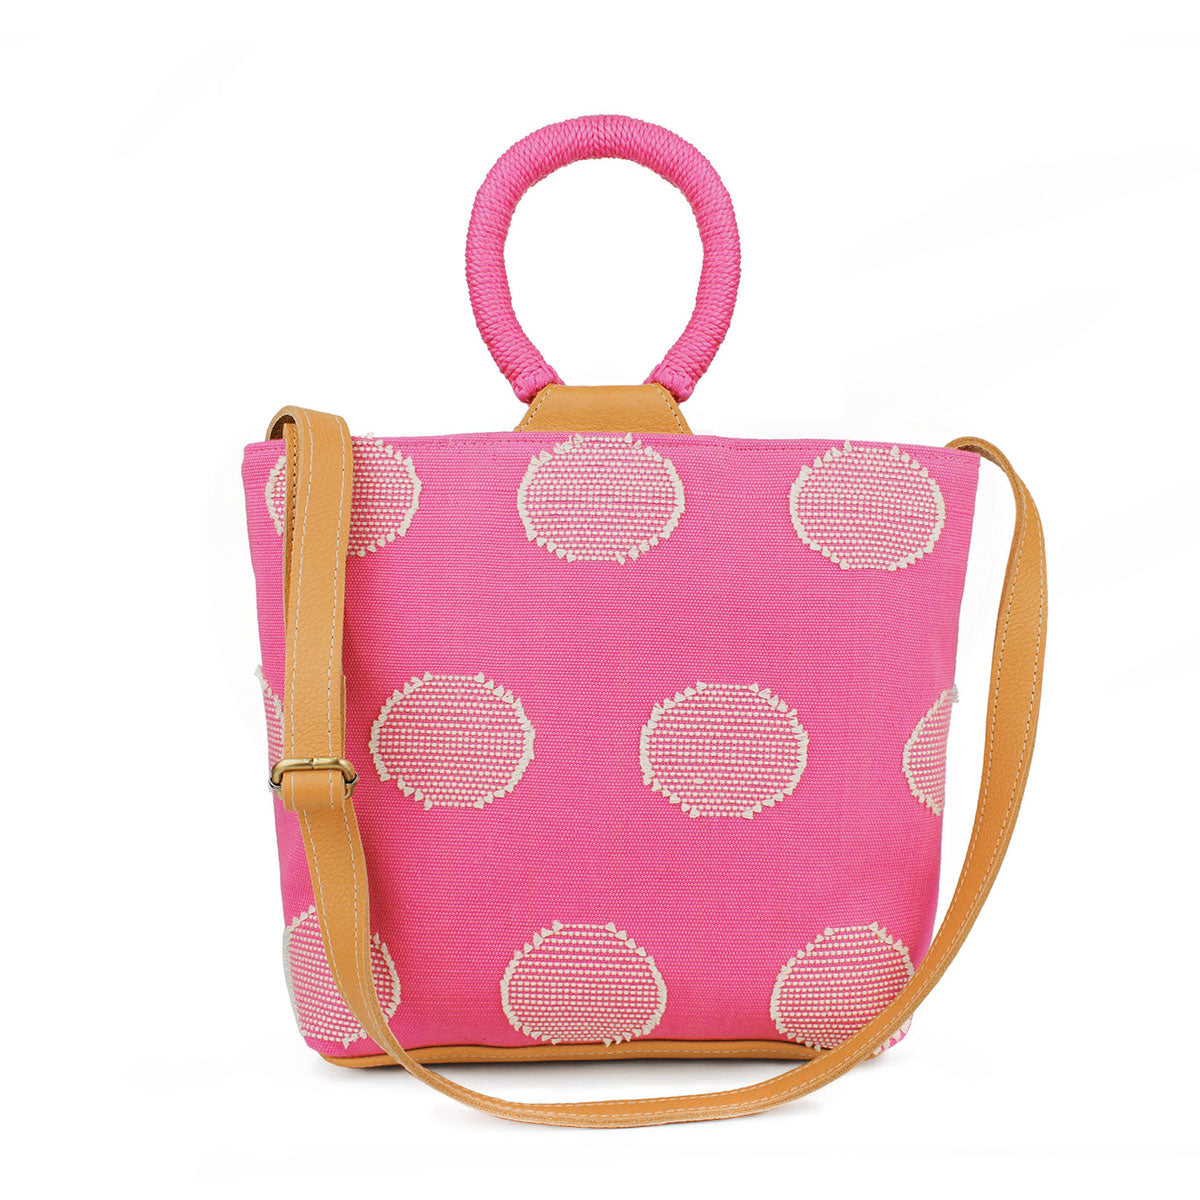 Dalila Handwoven Tote Sunset Pink